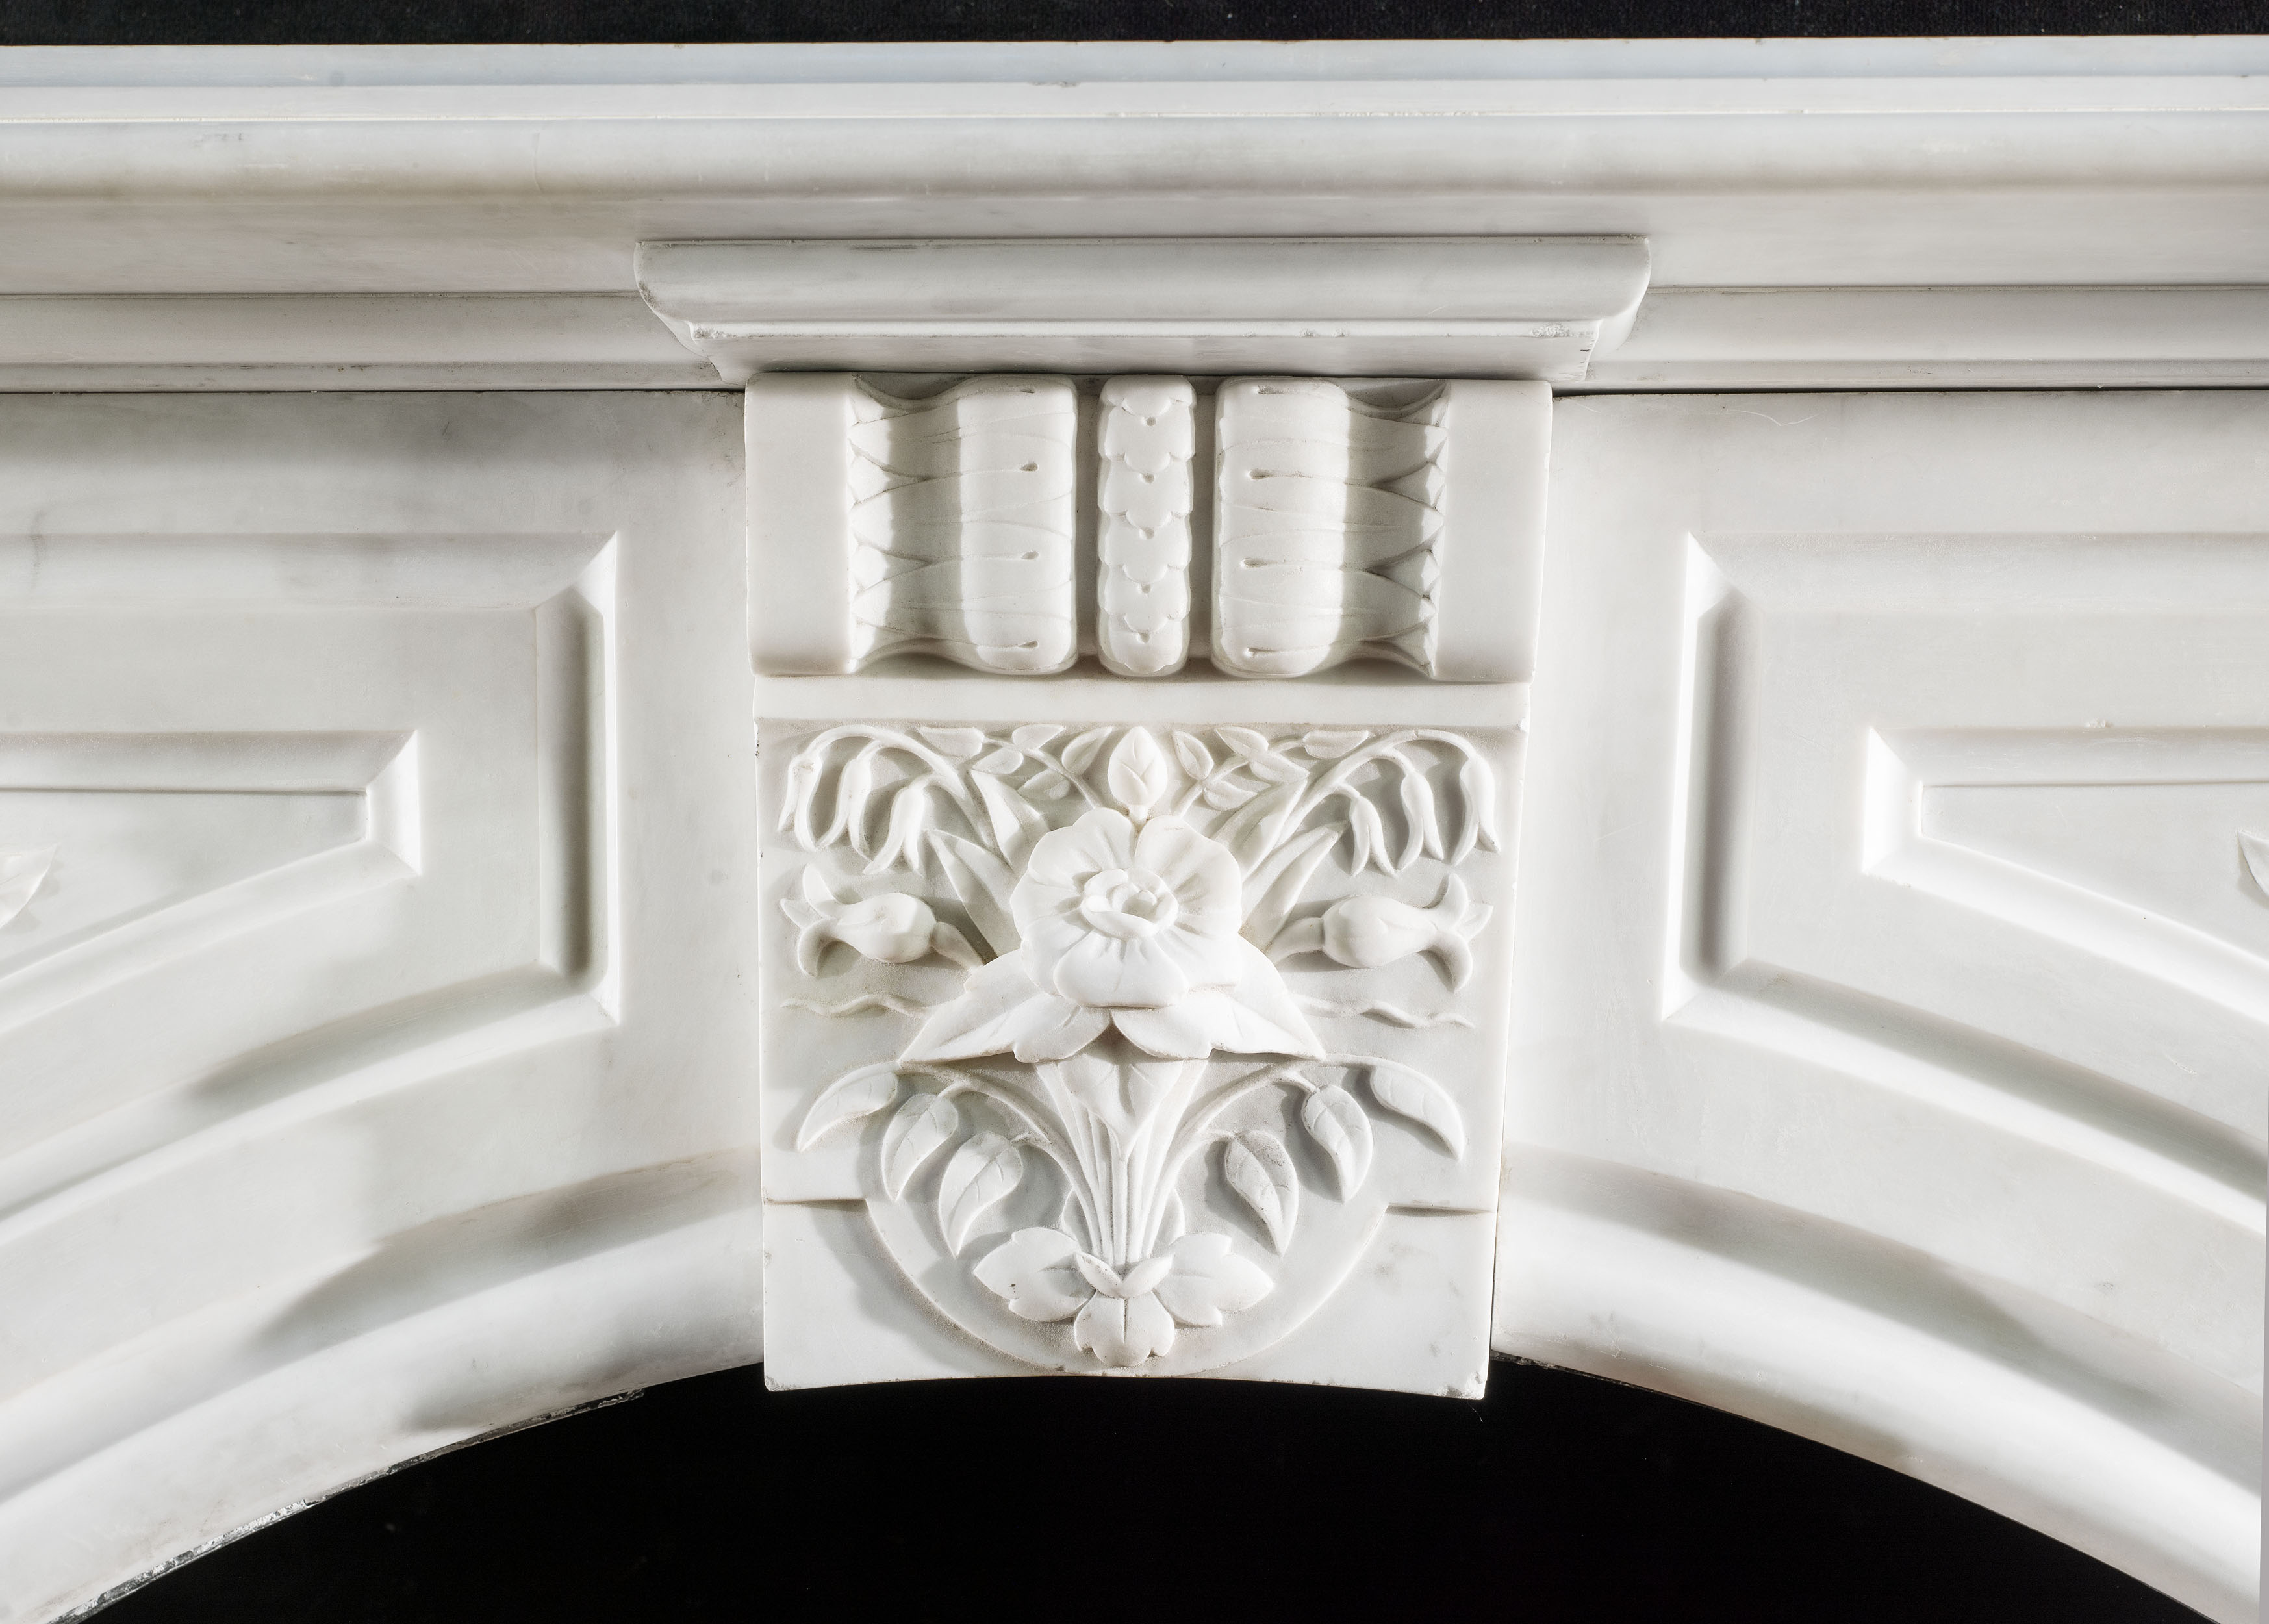 A Victorian arched marble antique fireplace 